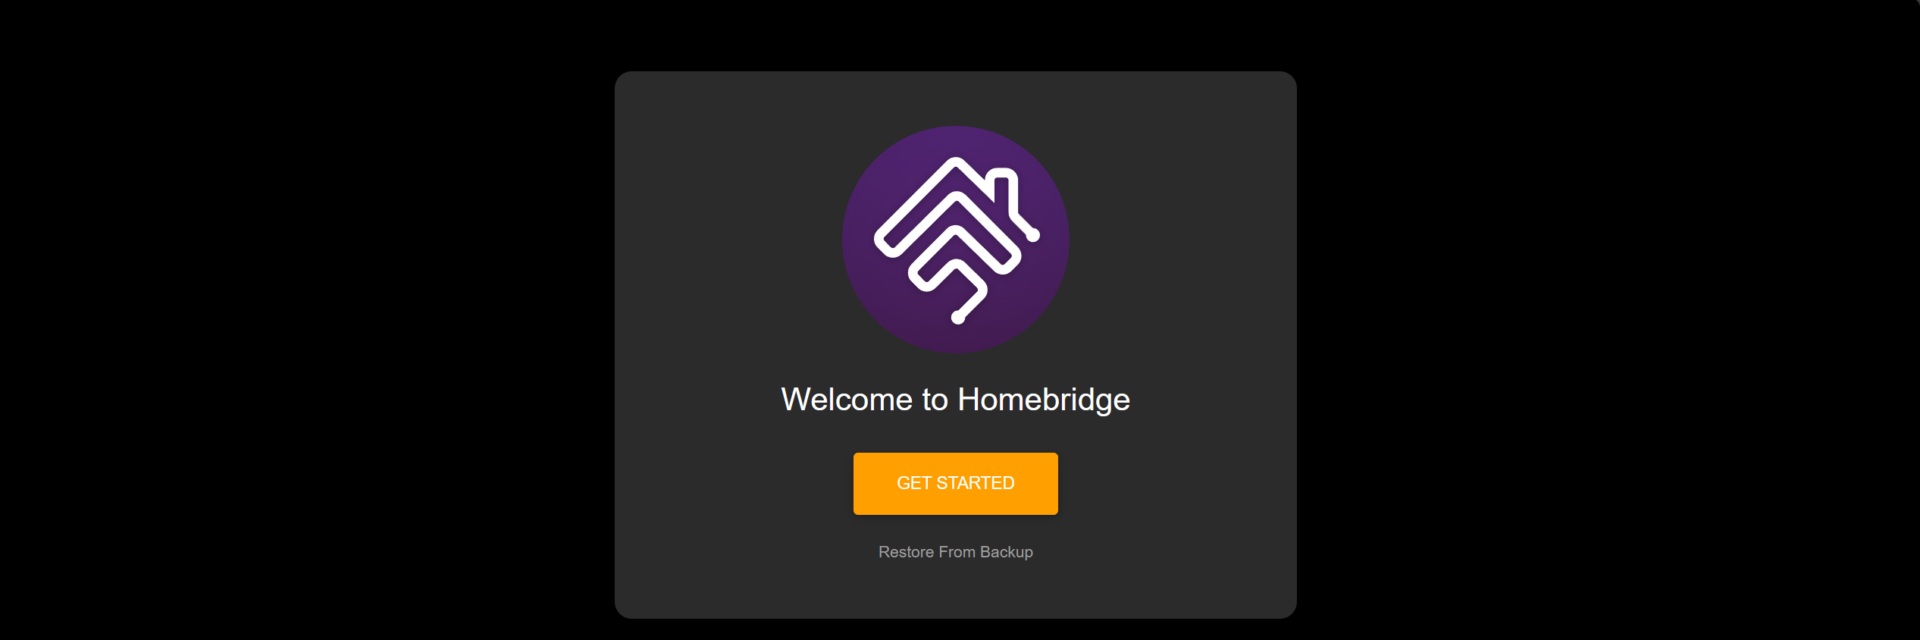 How to Install Homebridge on a Synology NAS